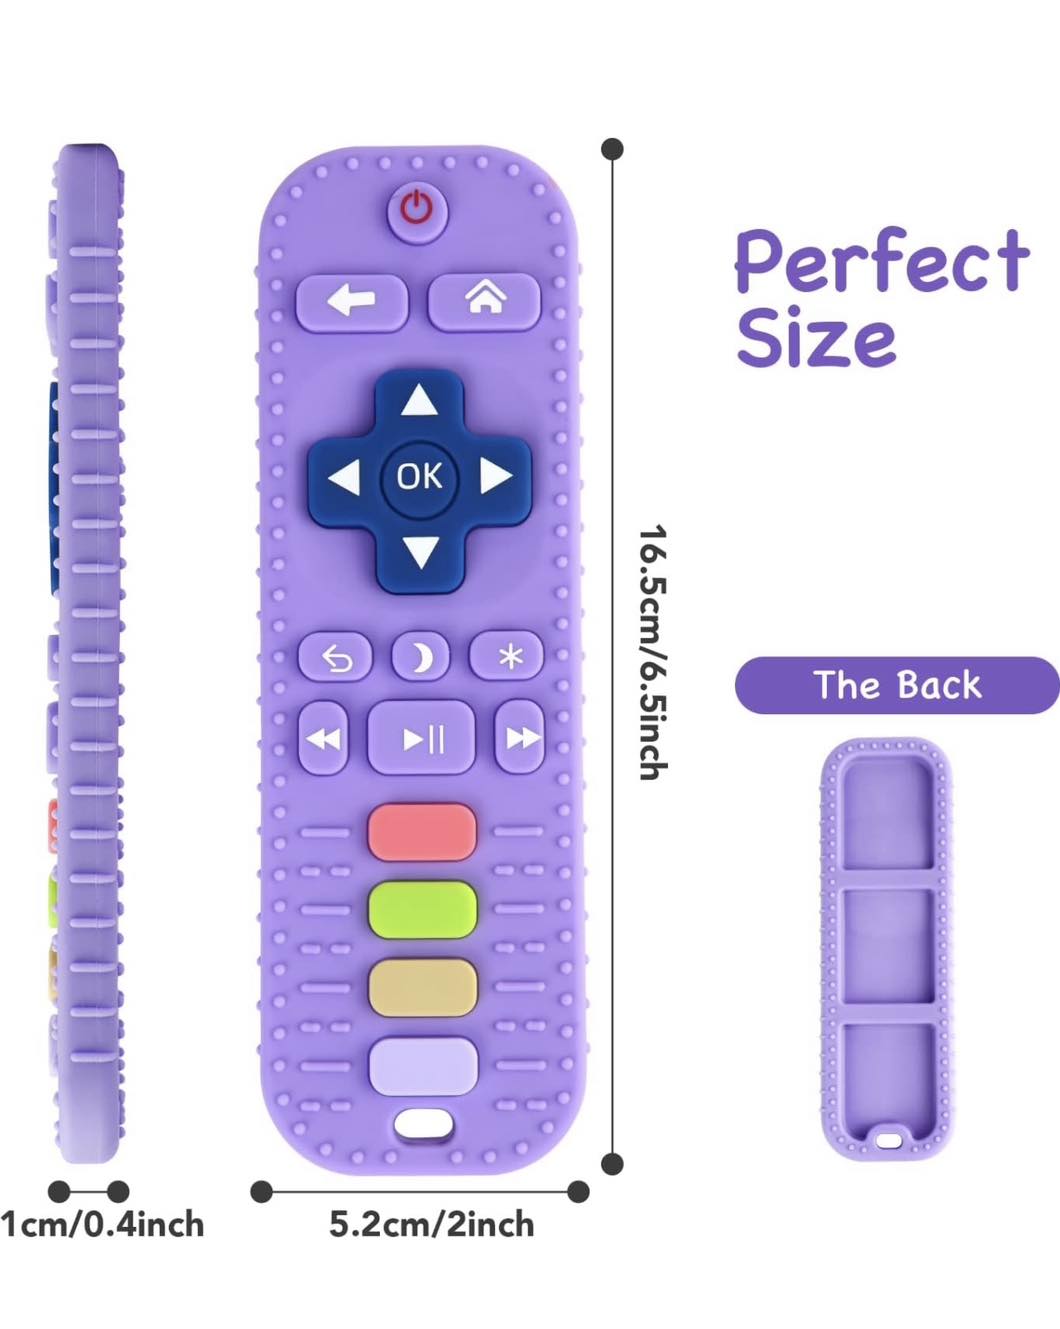 Baby Remote Control Shaped Silicone Teether Type 1 (3m+)